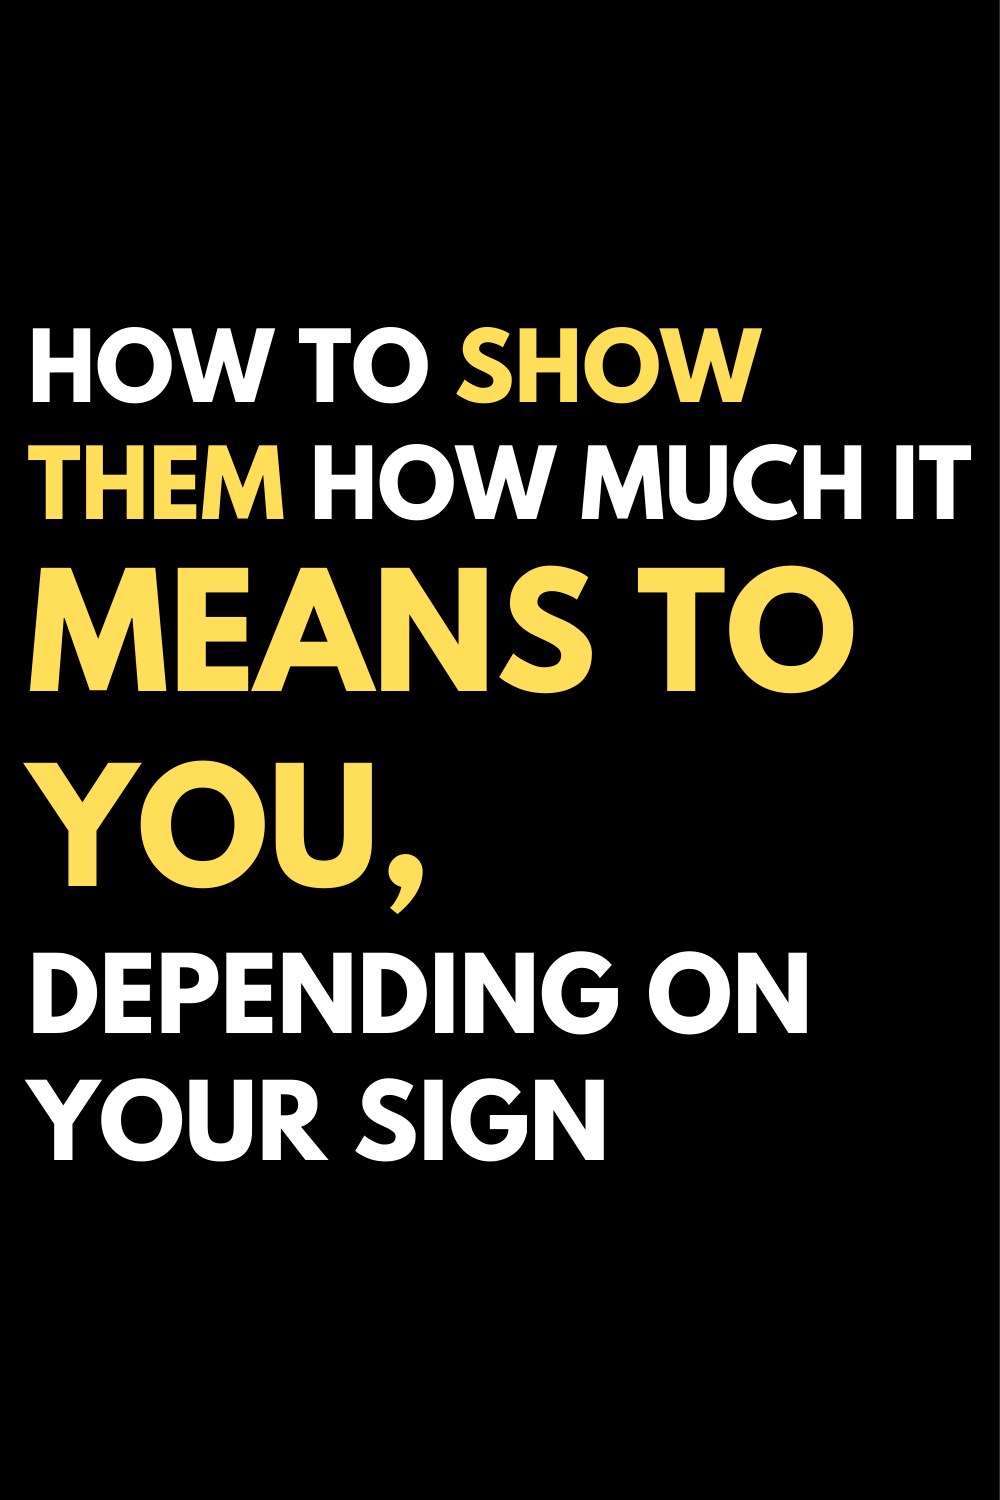 How to show them how much it means to you, depending on your sign